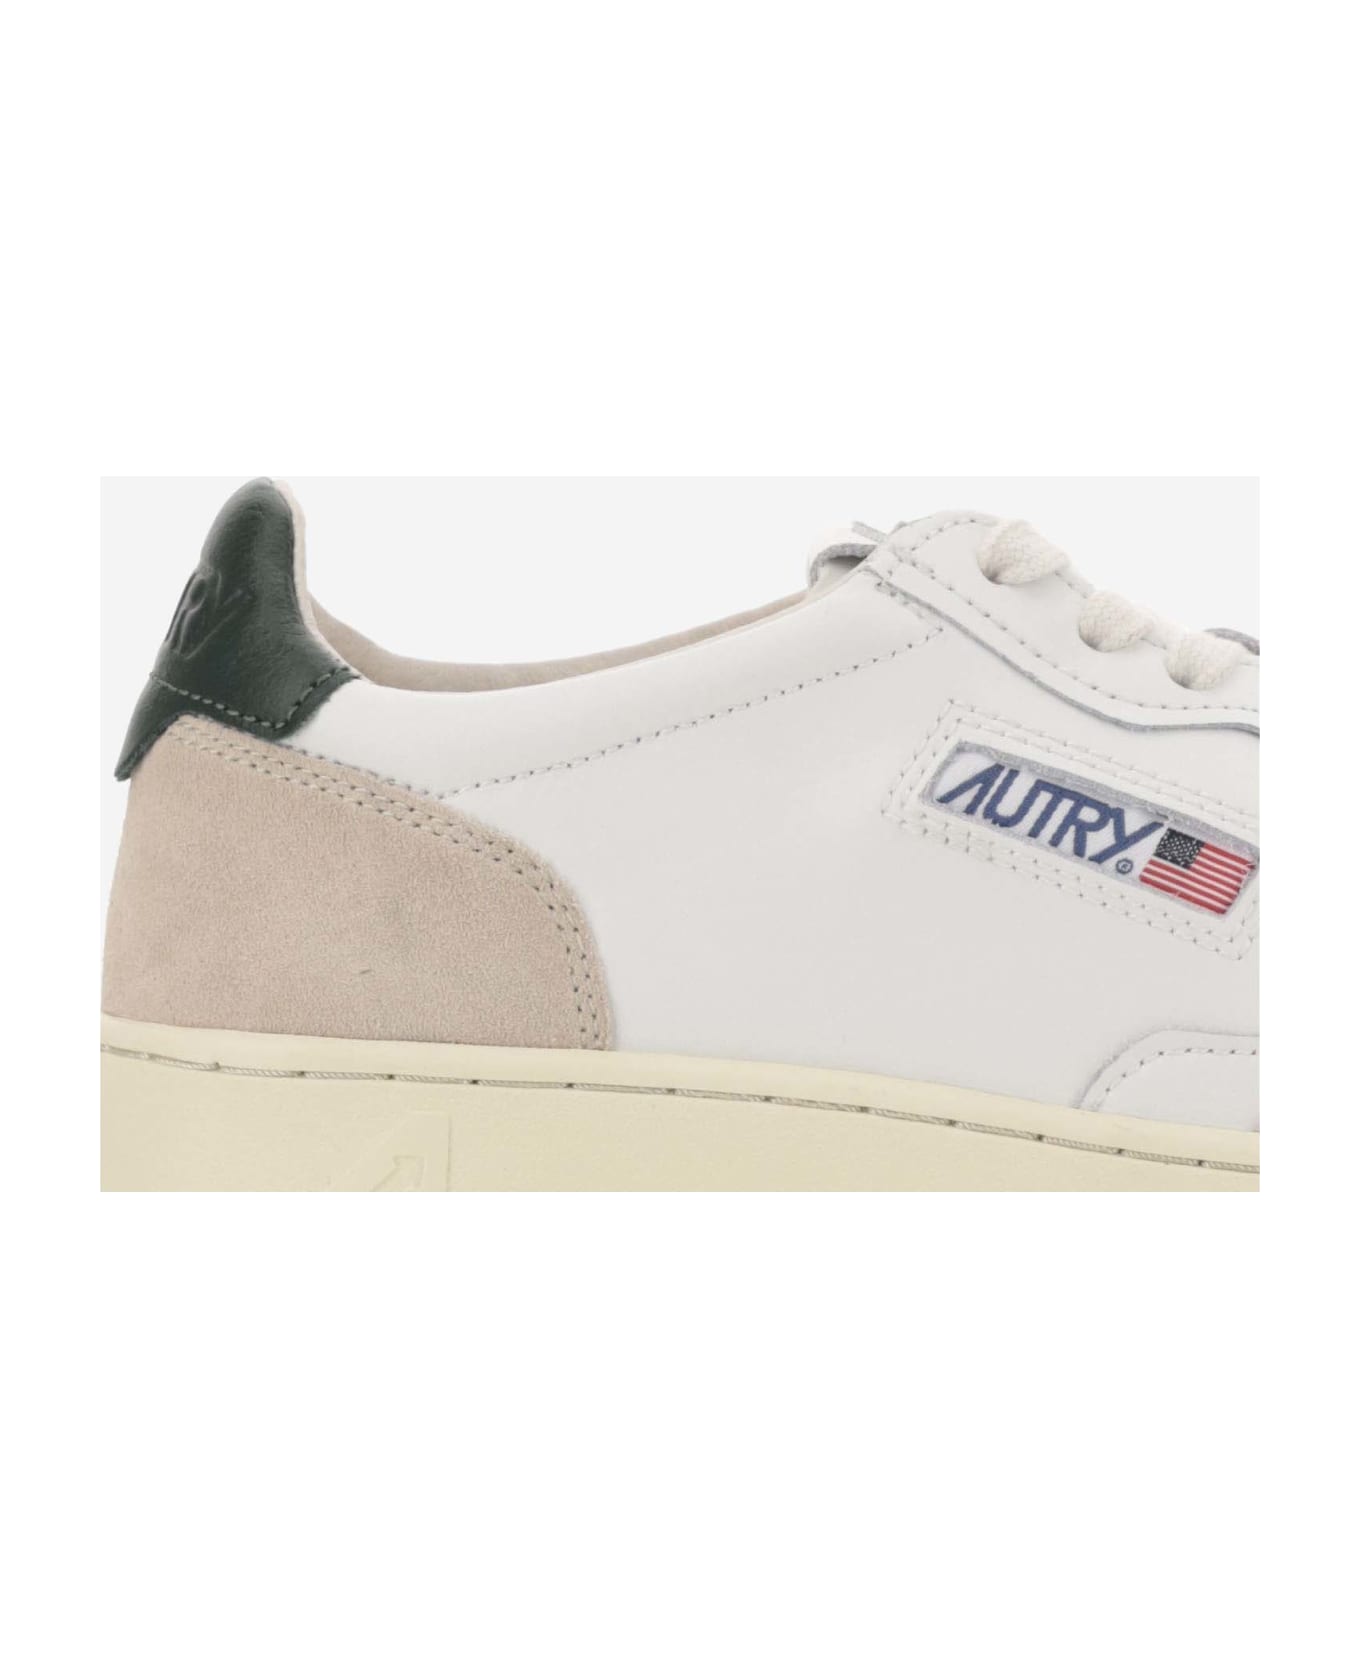 Autry Low Medalist Sneakers - white スニーカー